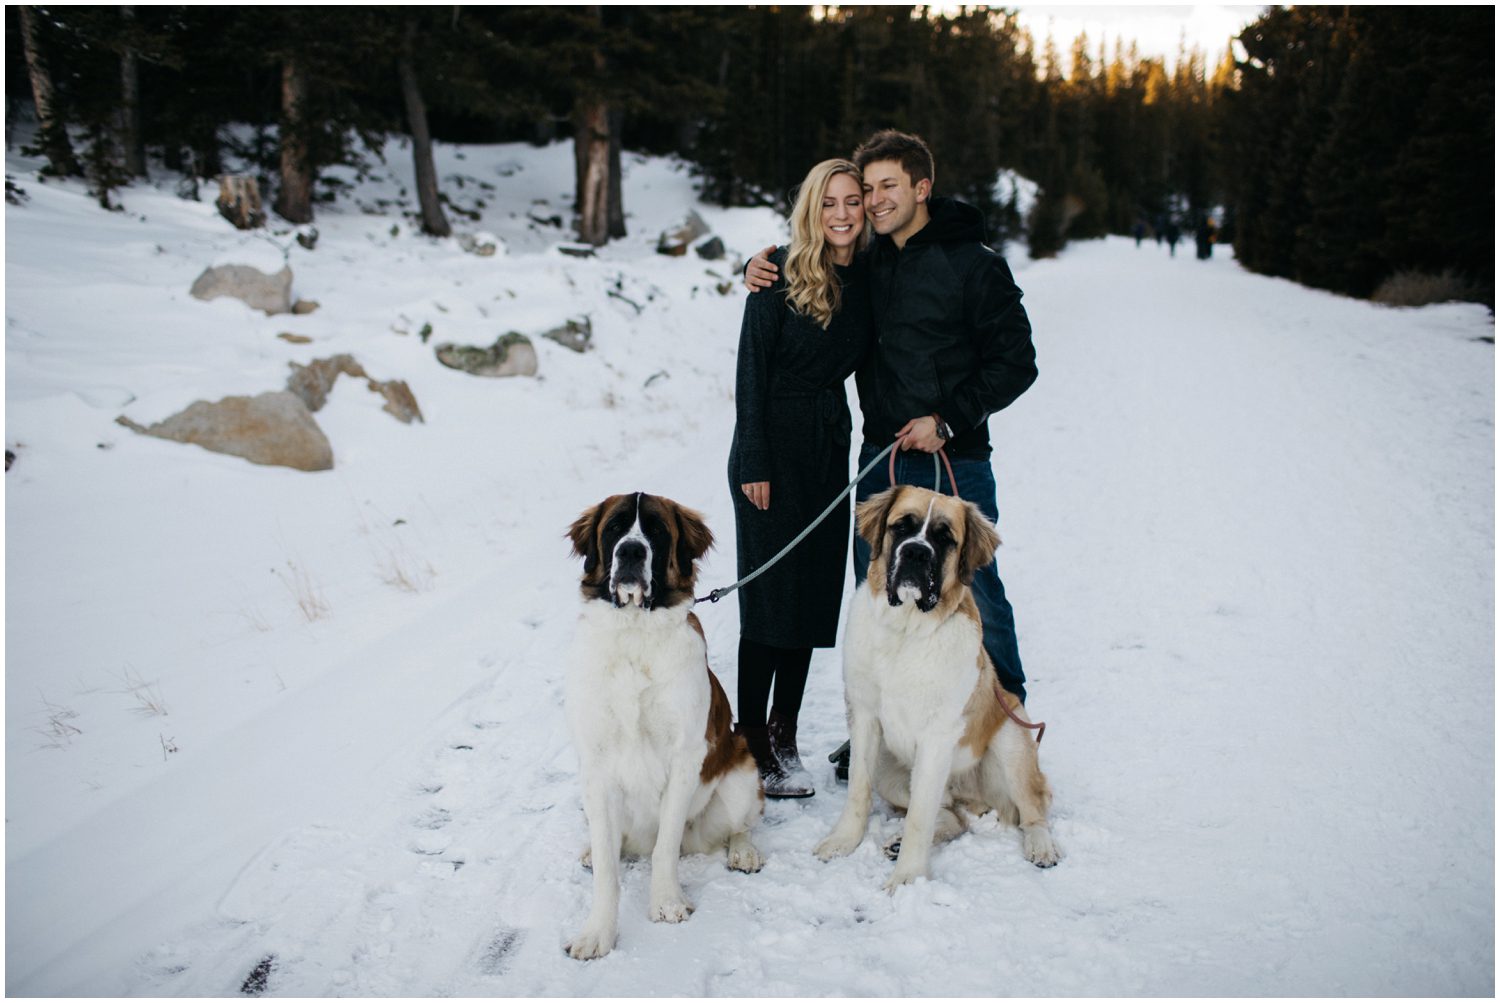 Engagement Session at Brainard Lake in Boulder Colorado  Boulder Colorado engagement photos, Boulder Colorado Photographer, Boulder Wedding Photographer, Boulder engagement photographer, Boulder engagement photos, Engagement session locations in Boulder, Colorado winter engagement session, Winter engagement photos, Mountain engagement session, Snowy engagement photos, Engagement photos with dogs, Save the date, Save the data photo ideas, Photo session with dogs, St Bernard, Brainard Lake, Colorado, Boulder Colorado, Nederland Colorado, Ward Colorado, Colorado wedding, Colorado photographer